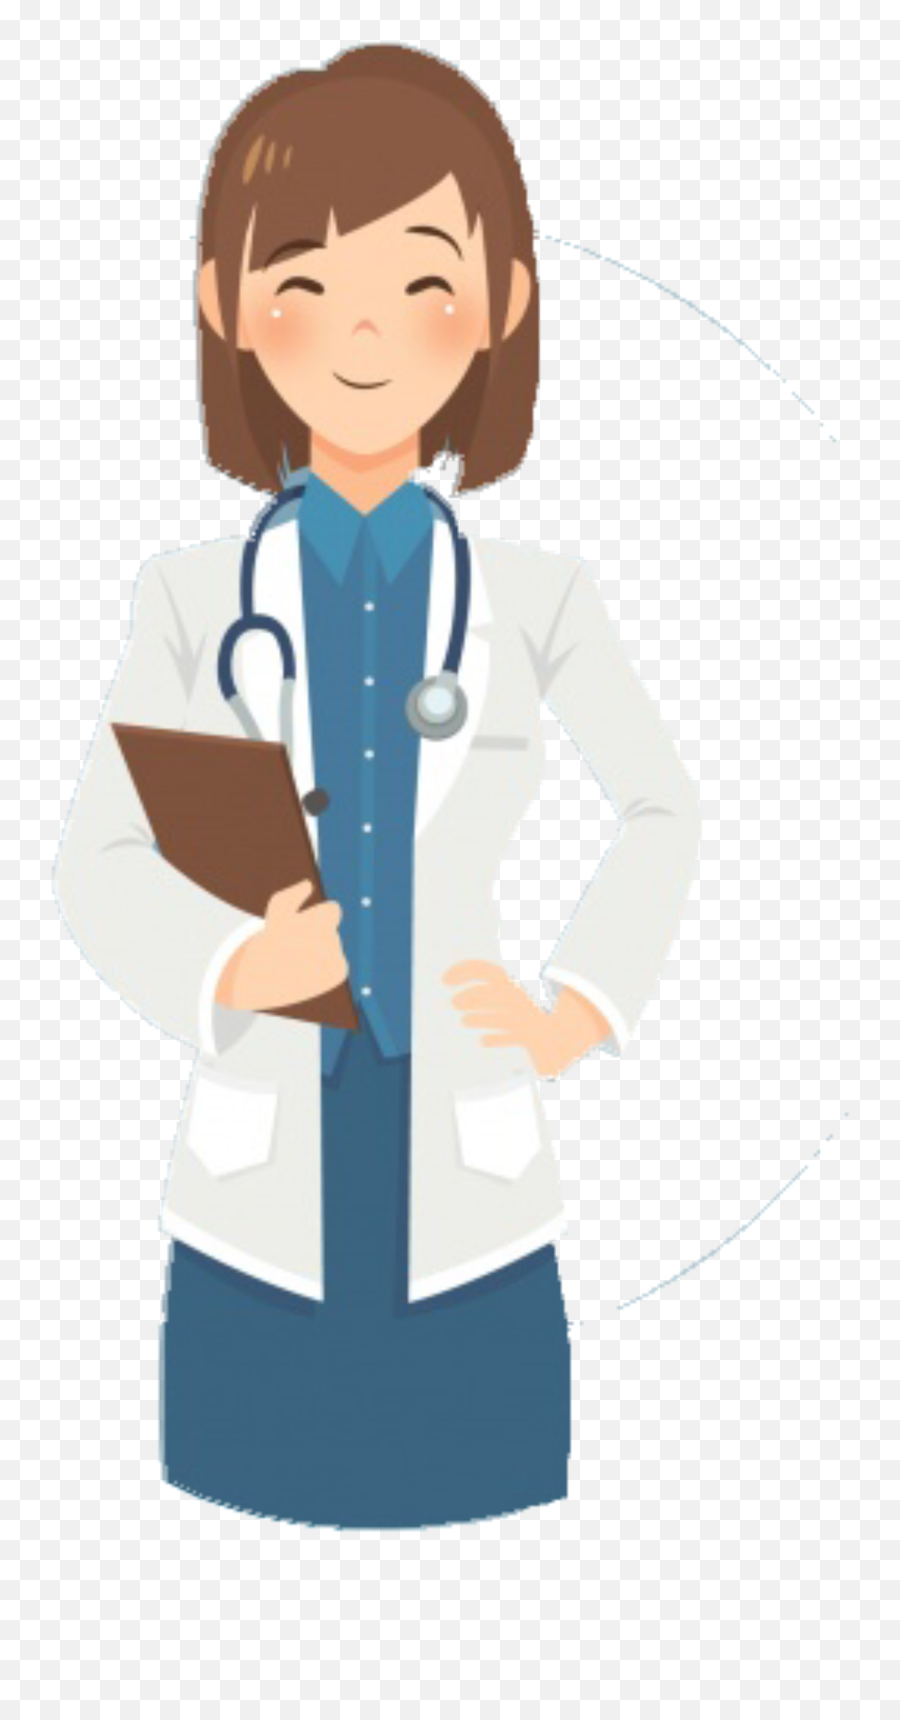 The Most Edited Arzt Picsart Emoji,Female Doctor Clipart